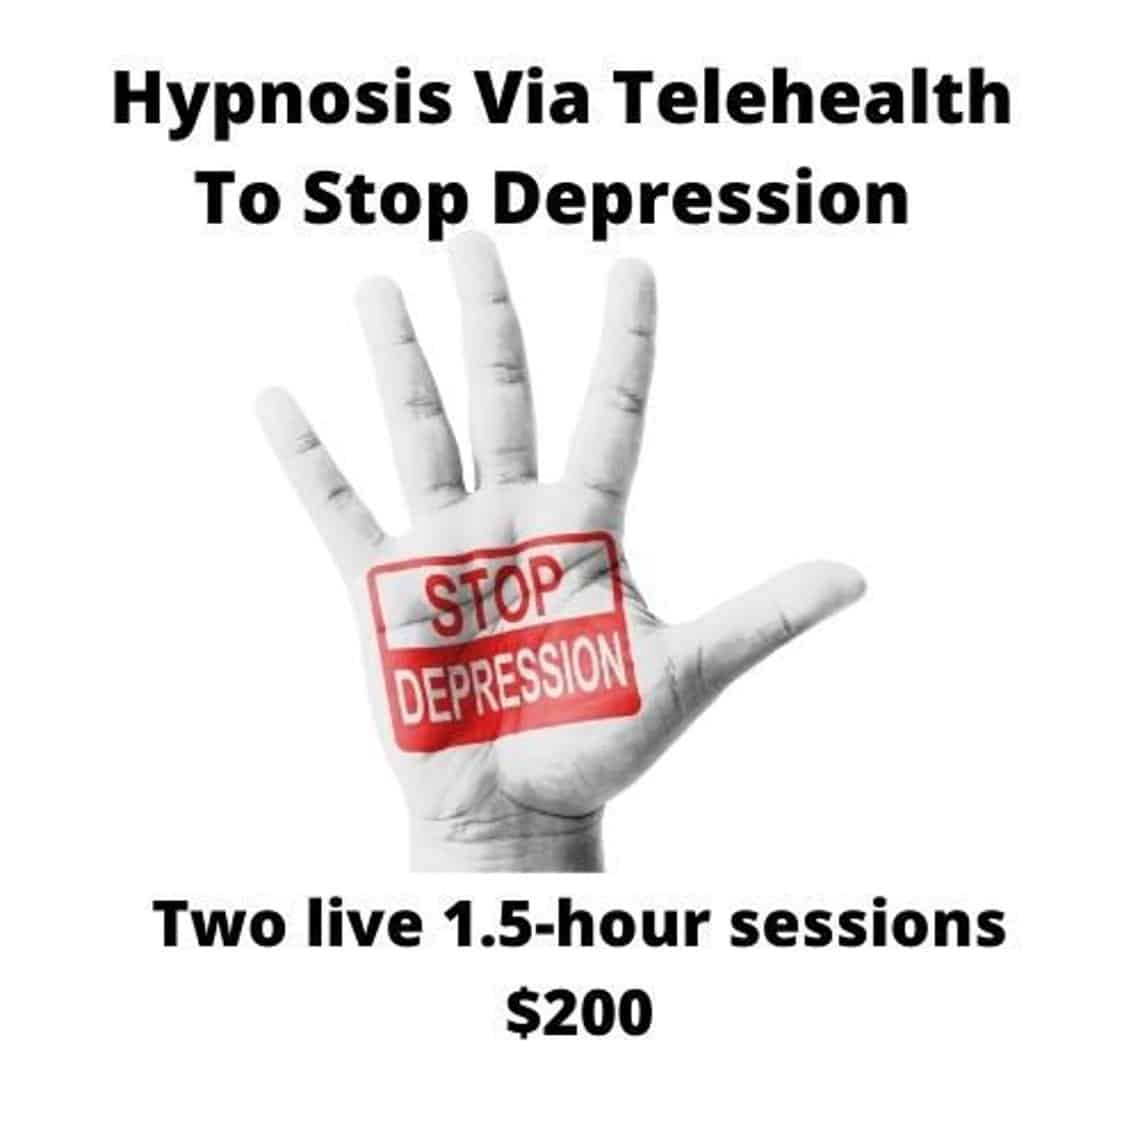 Live Hypnosis session to take control of your depression